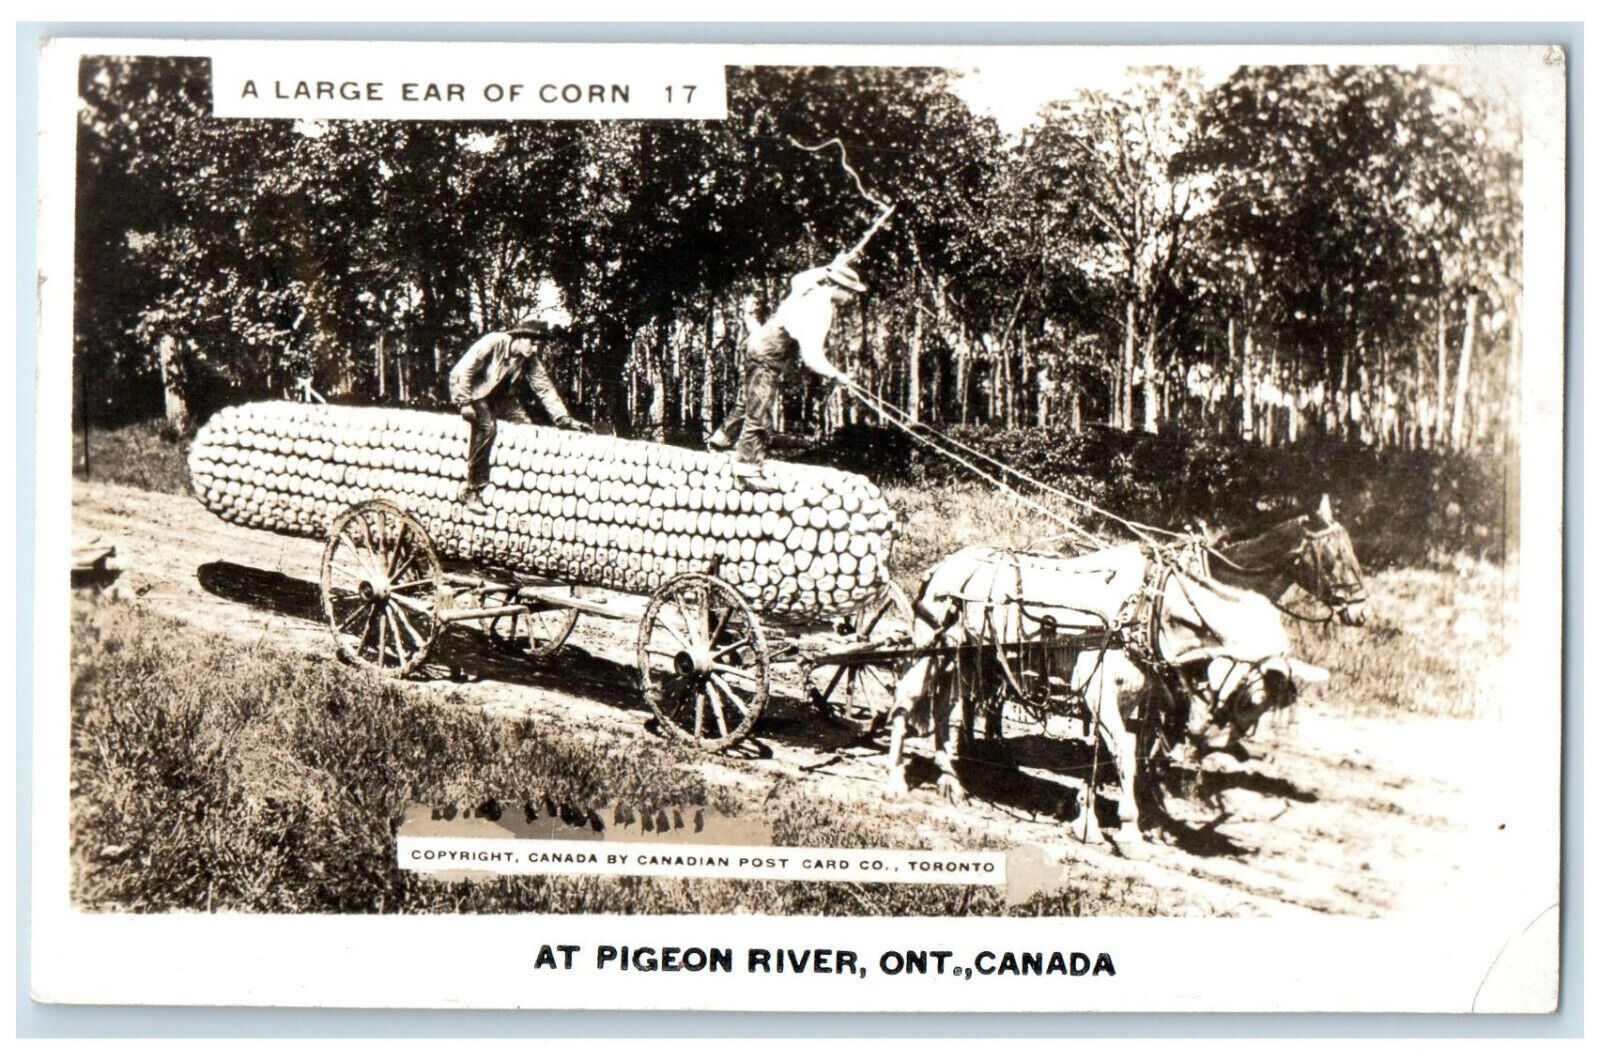 Pigeon River Canada RPPC Photo Postcard Giant Corn in Horse Carriage c1920's